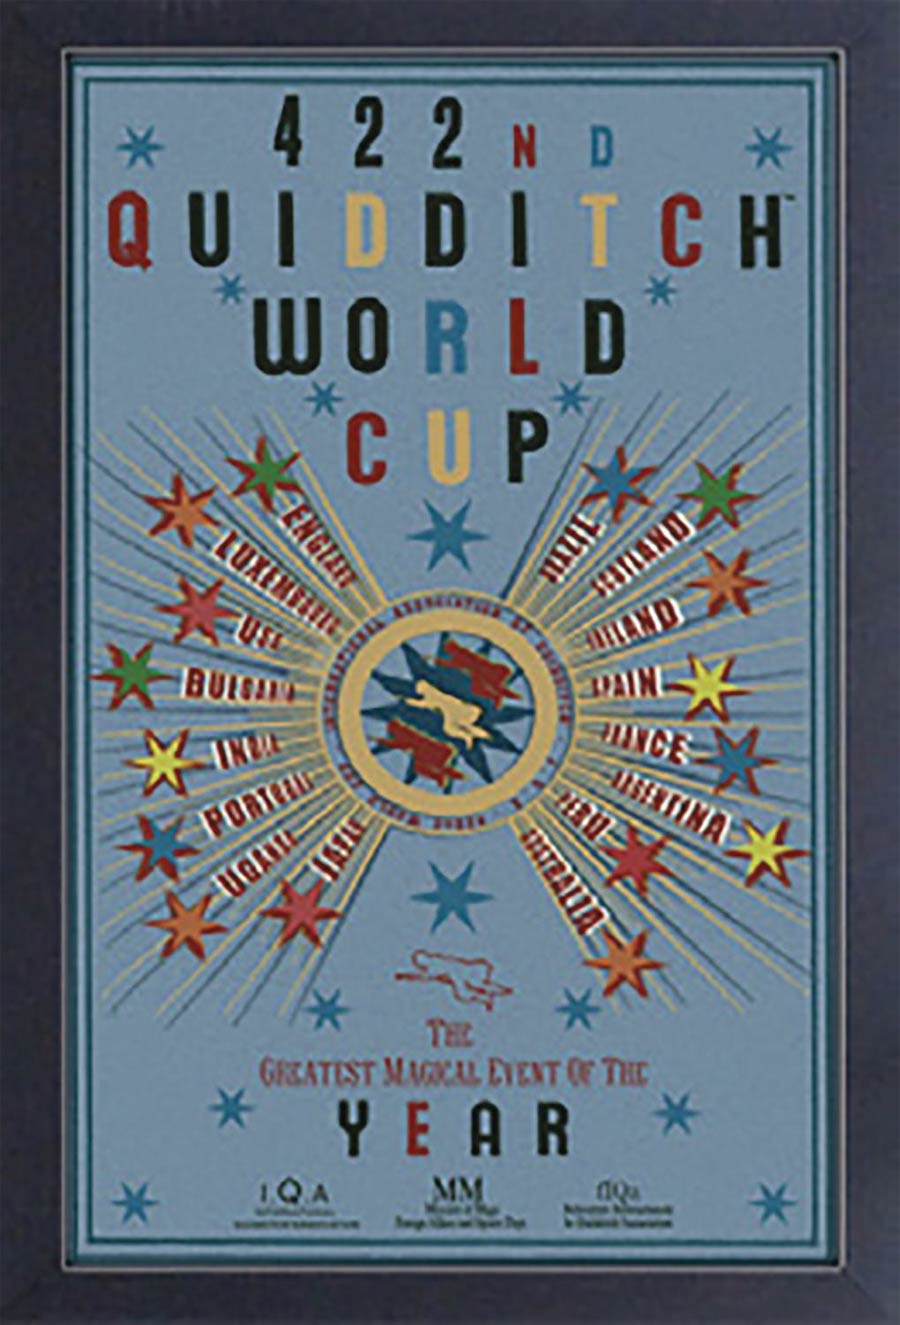 Harry Potter 11x17 Framed Print - Quidditch World Cup